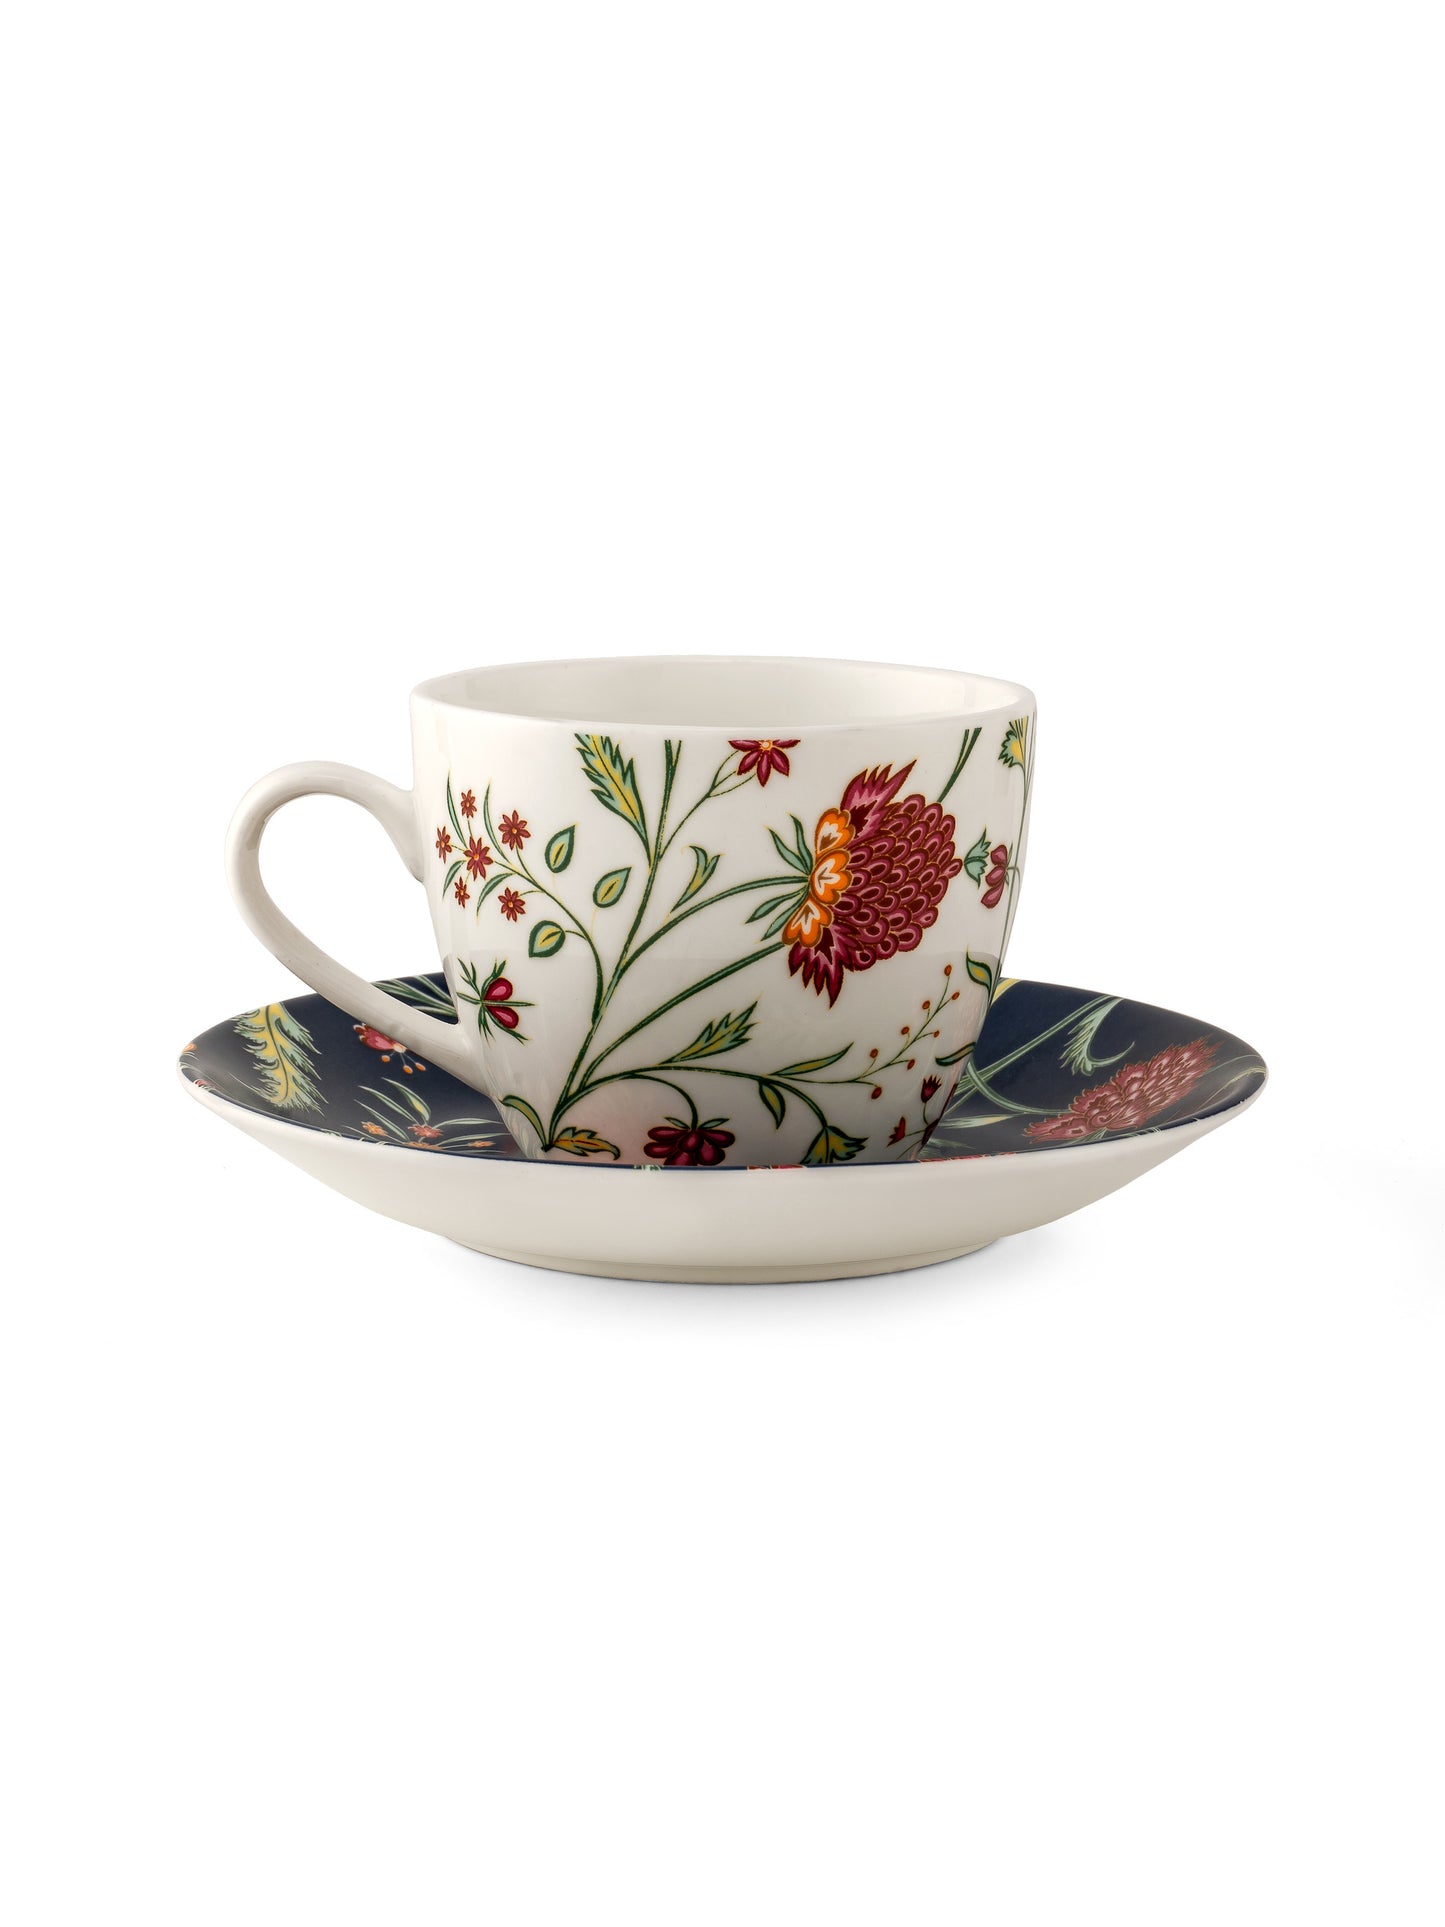 Buy JCPL Cream Cup & Saucer Set of 12 (6 Cups + 6 Saucer) GS302 Online at  Affordable Price – Clay Craft India